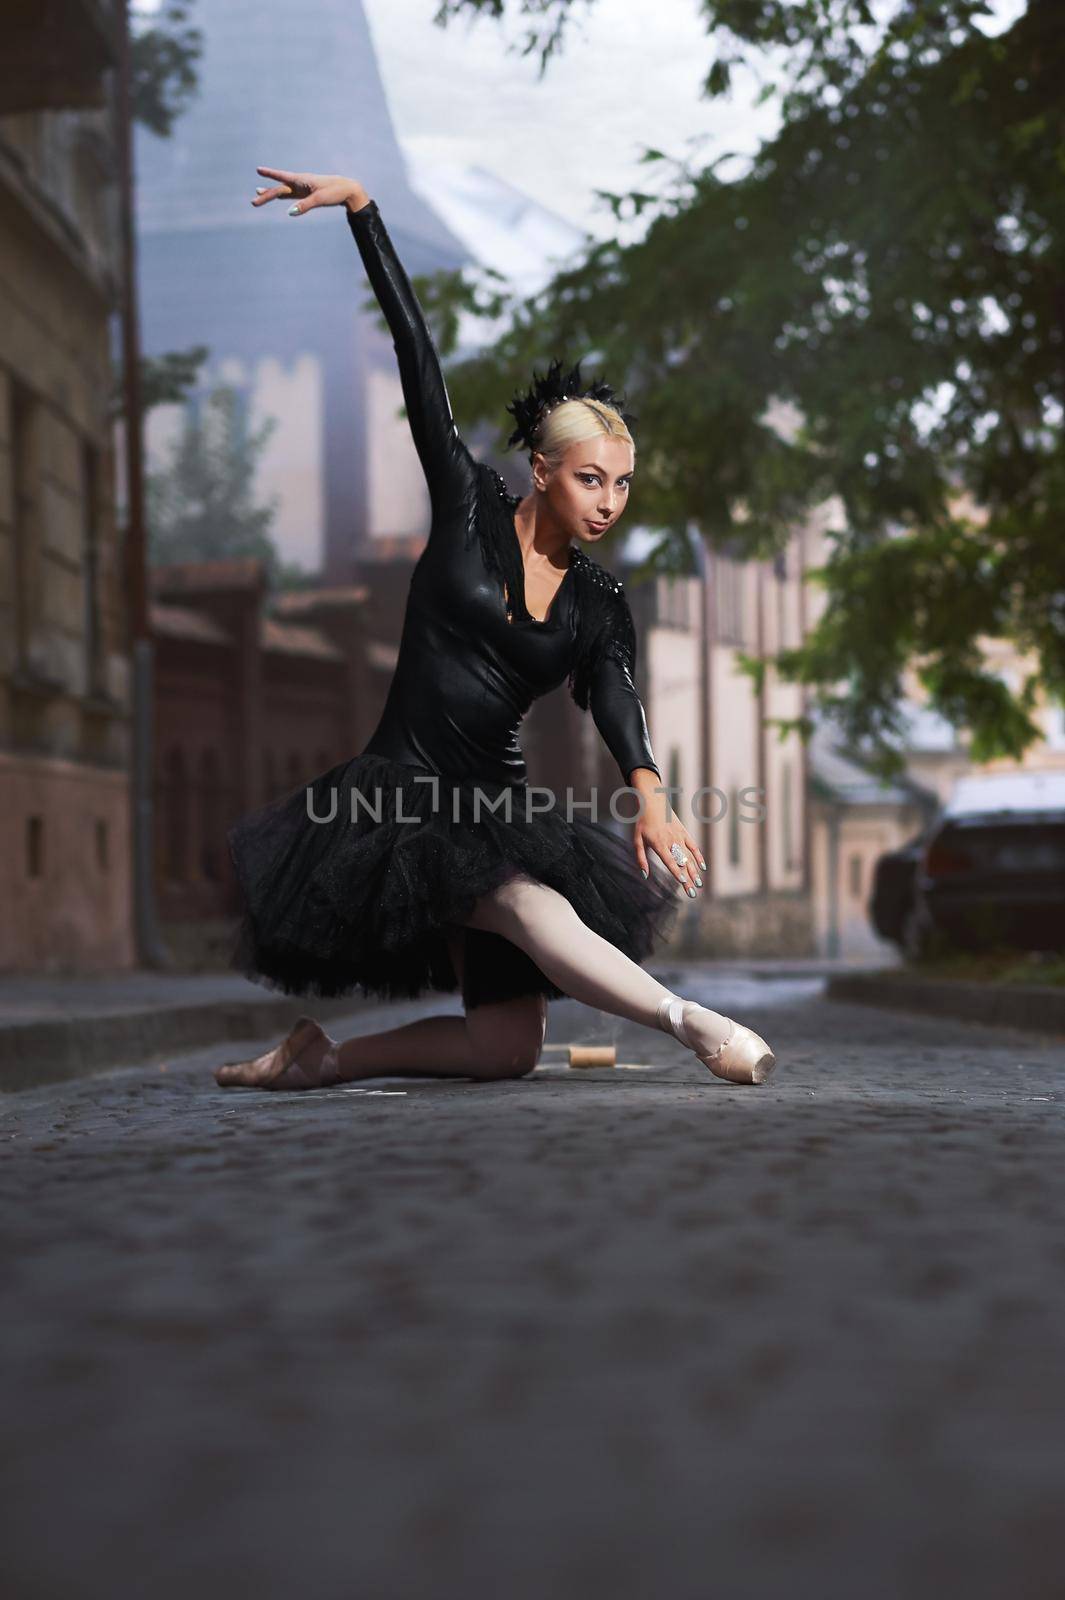 Gorgeous ballerina in black outfit dancing in the city streets by SerhiiBobyk